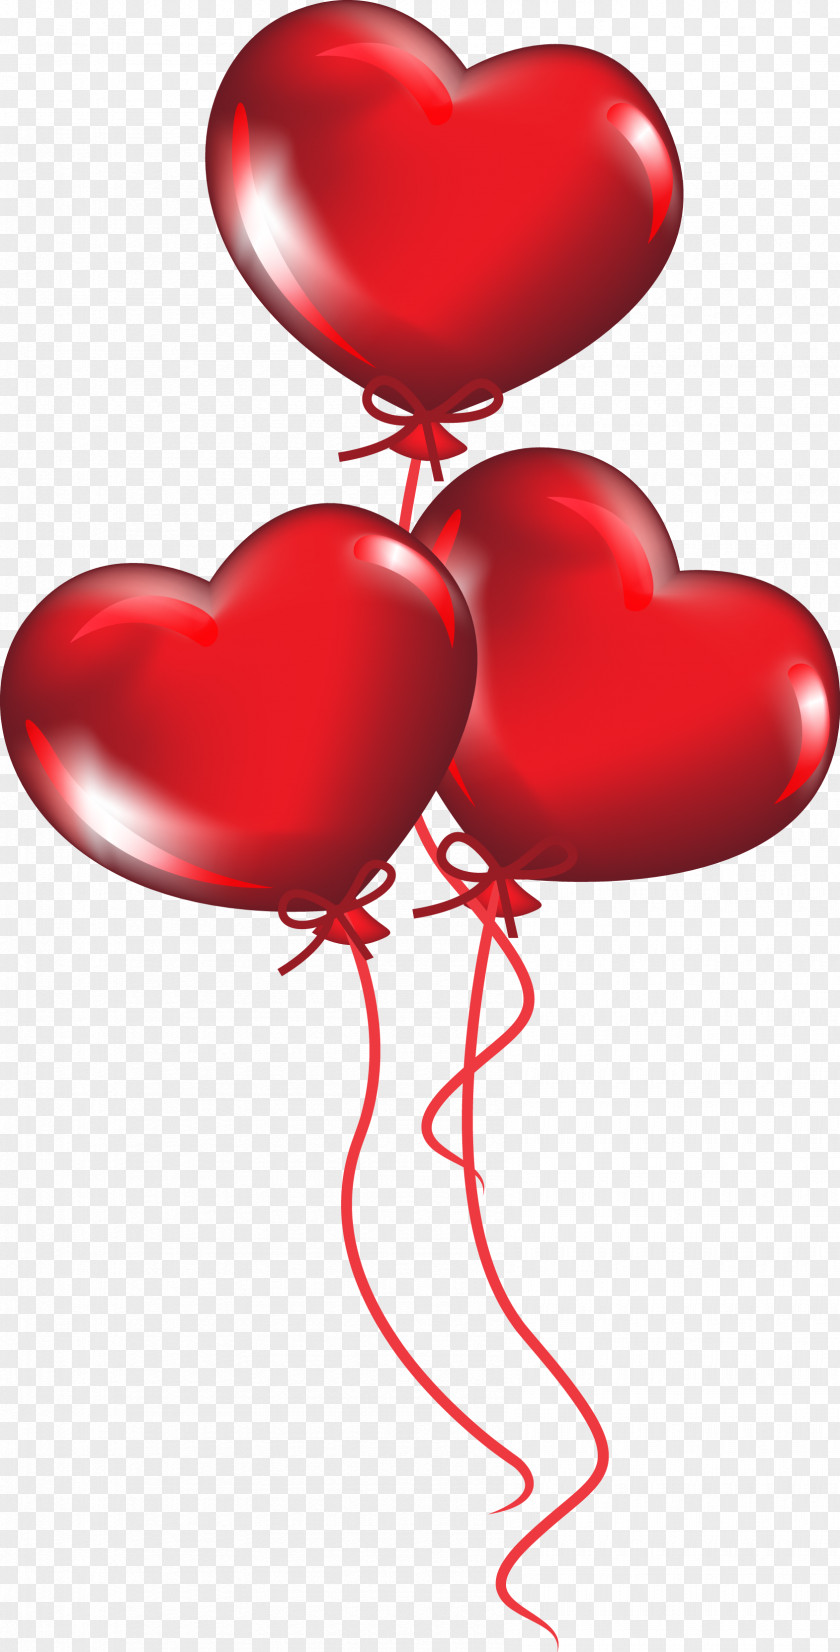 Heart-shaped Balloons Vector Material PNG